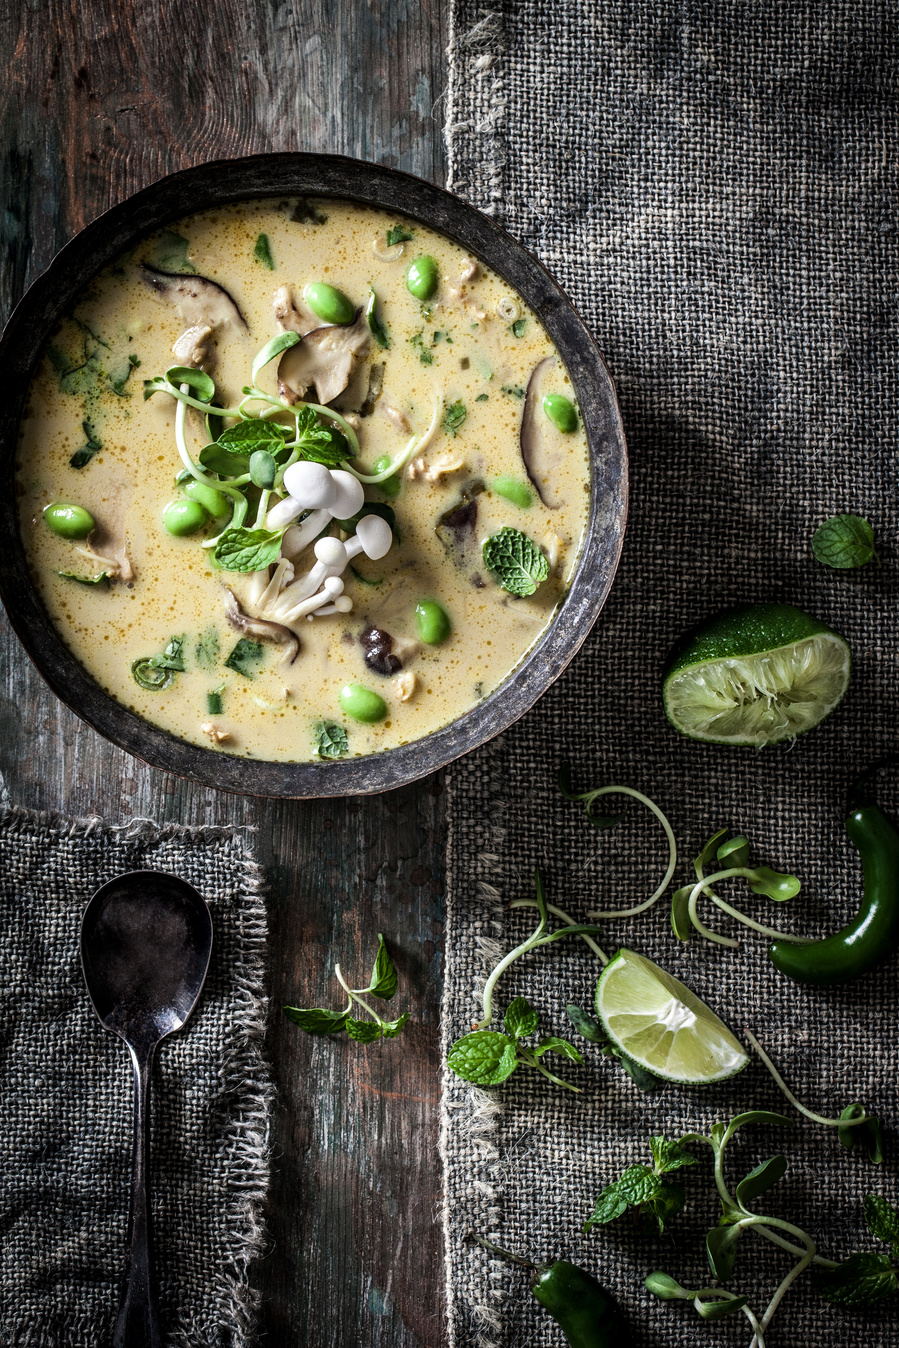 Overhead food photography bowl of mushroom soup. Dark food photography surface and props with yellow soup, and limes and greens on the surfaces. 